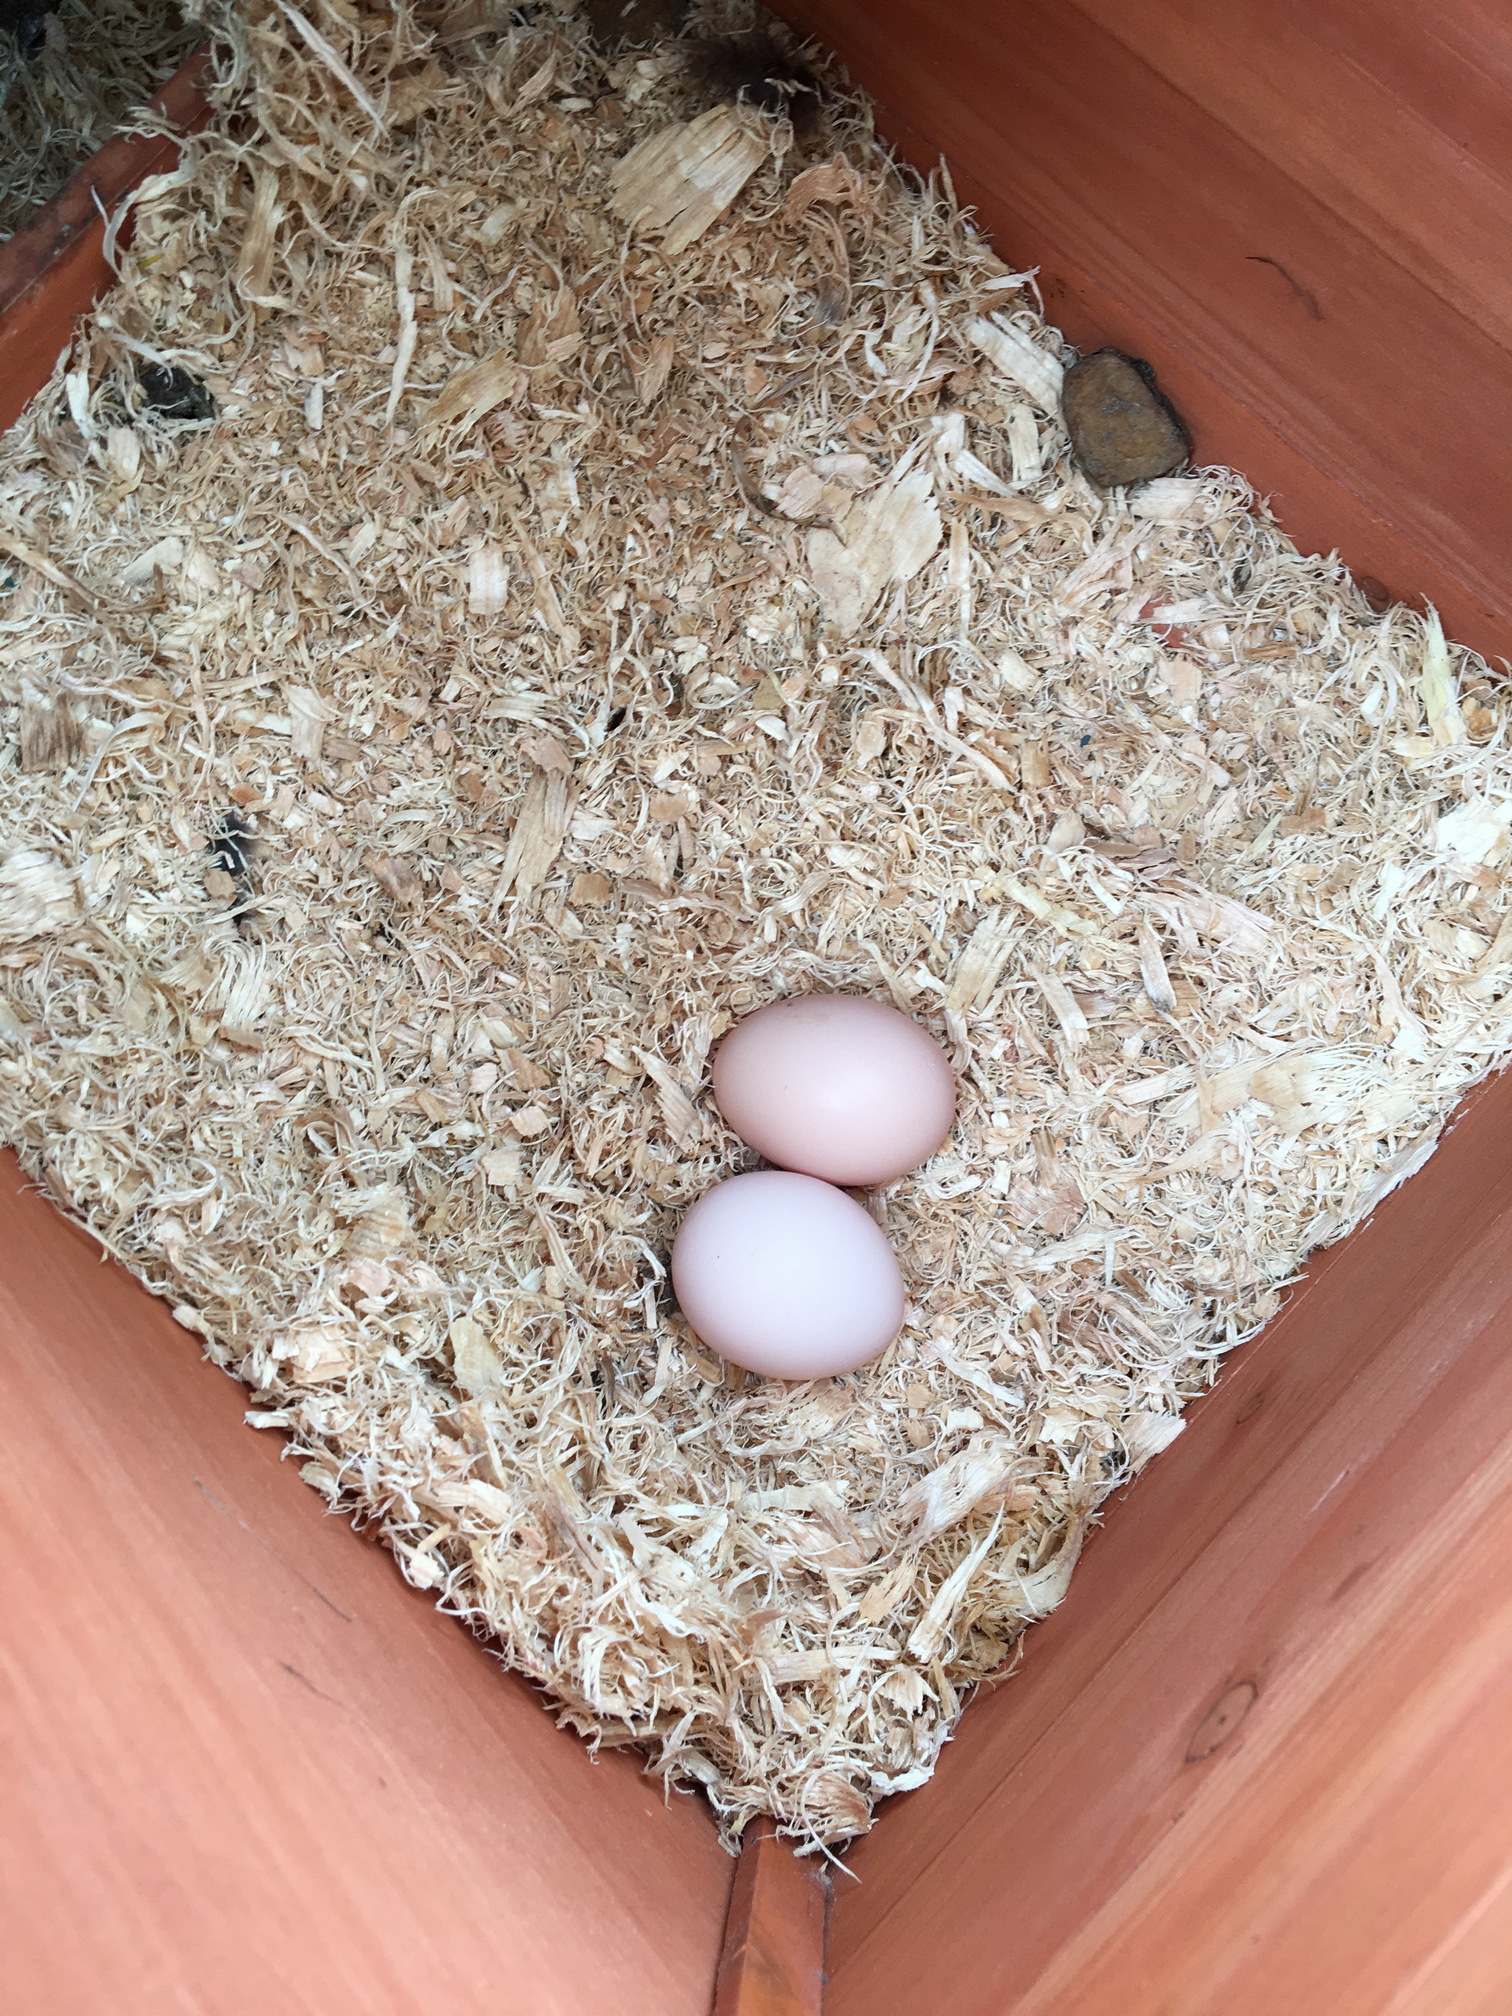 That's better! Two in the nesting box.